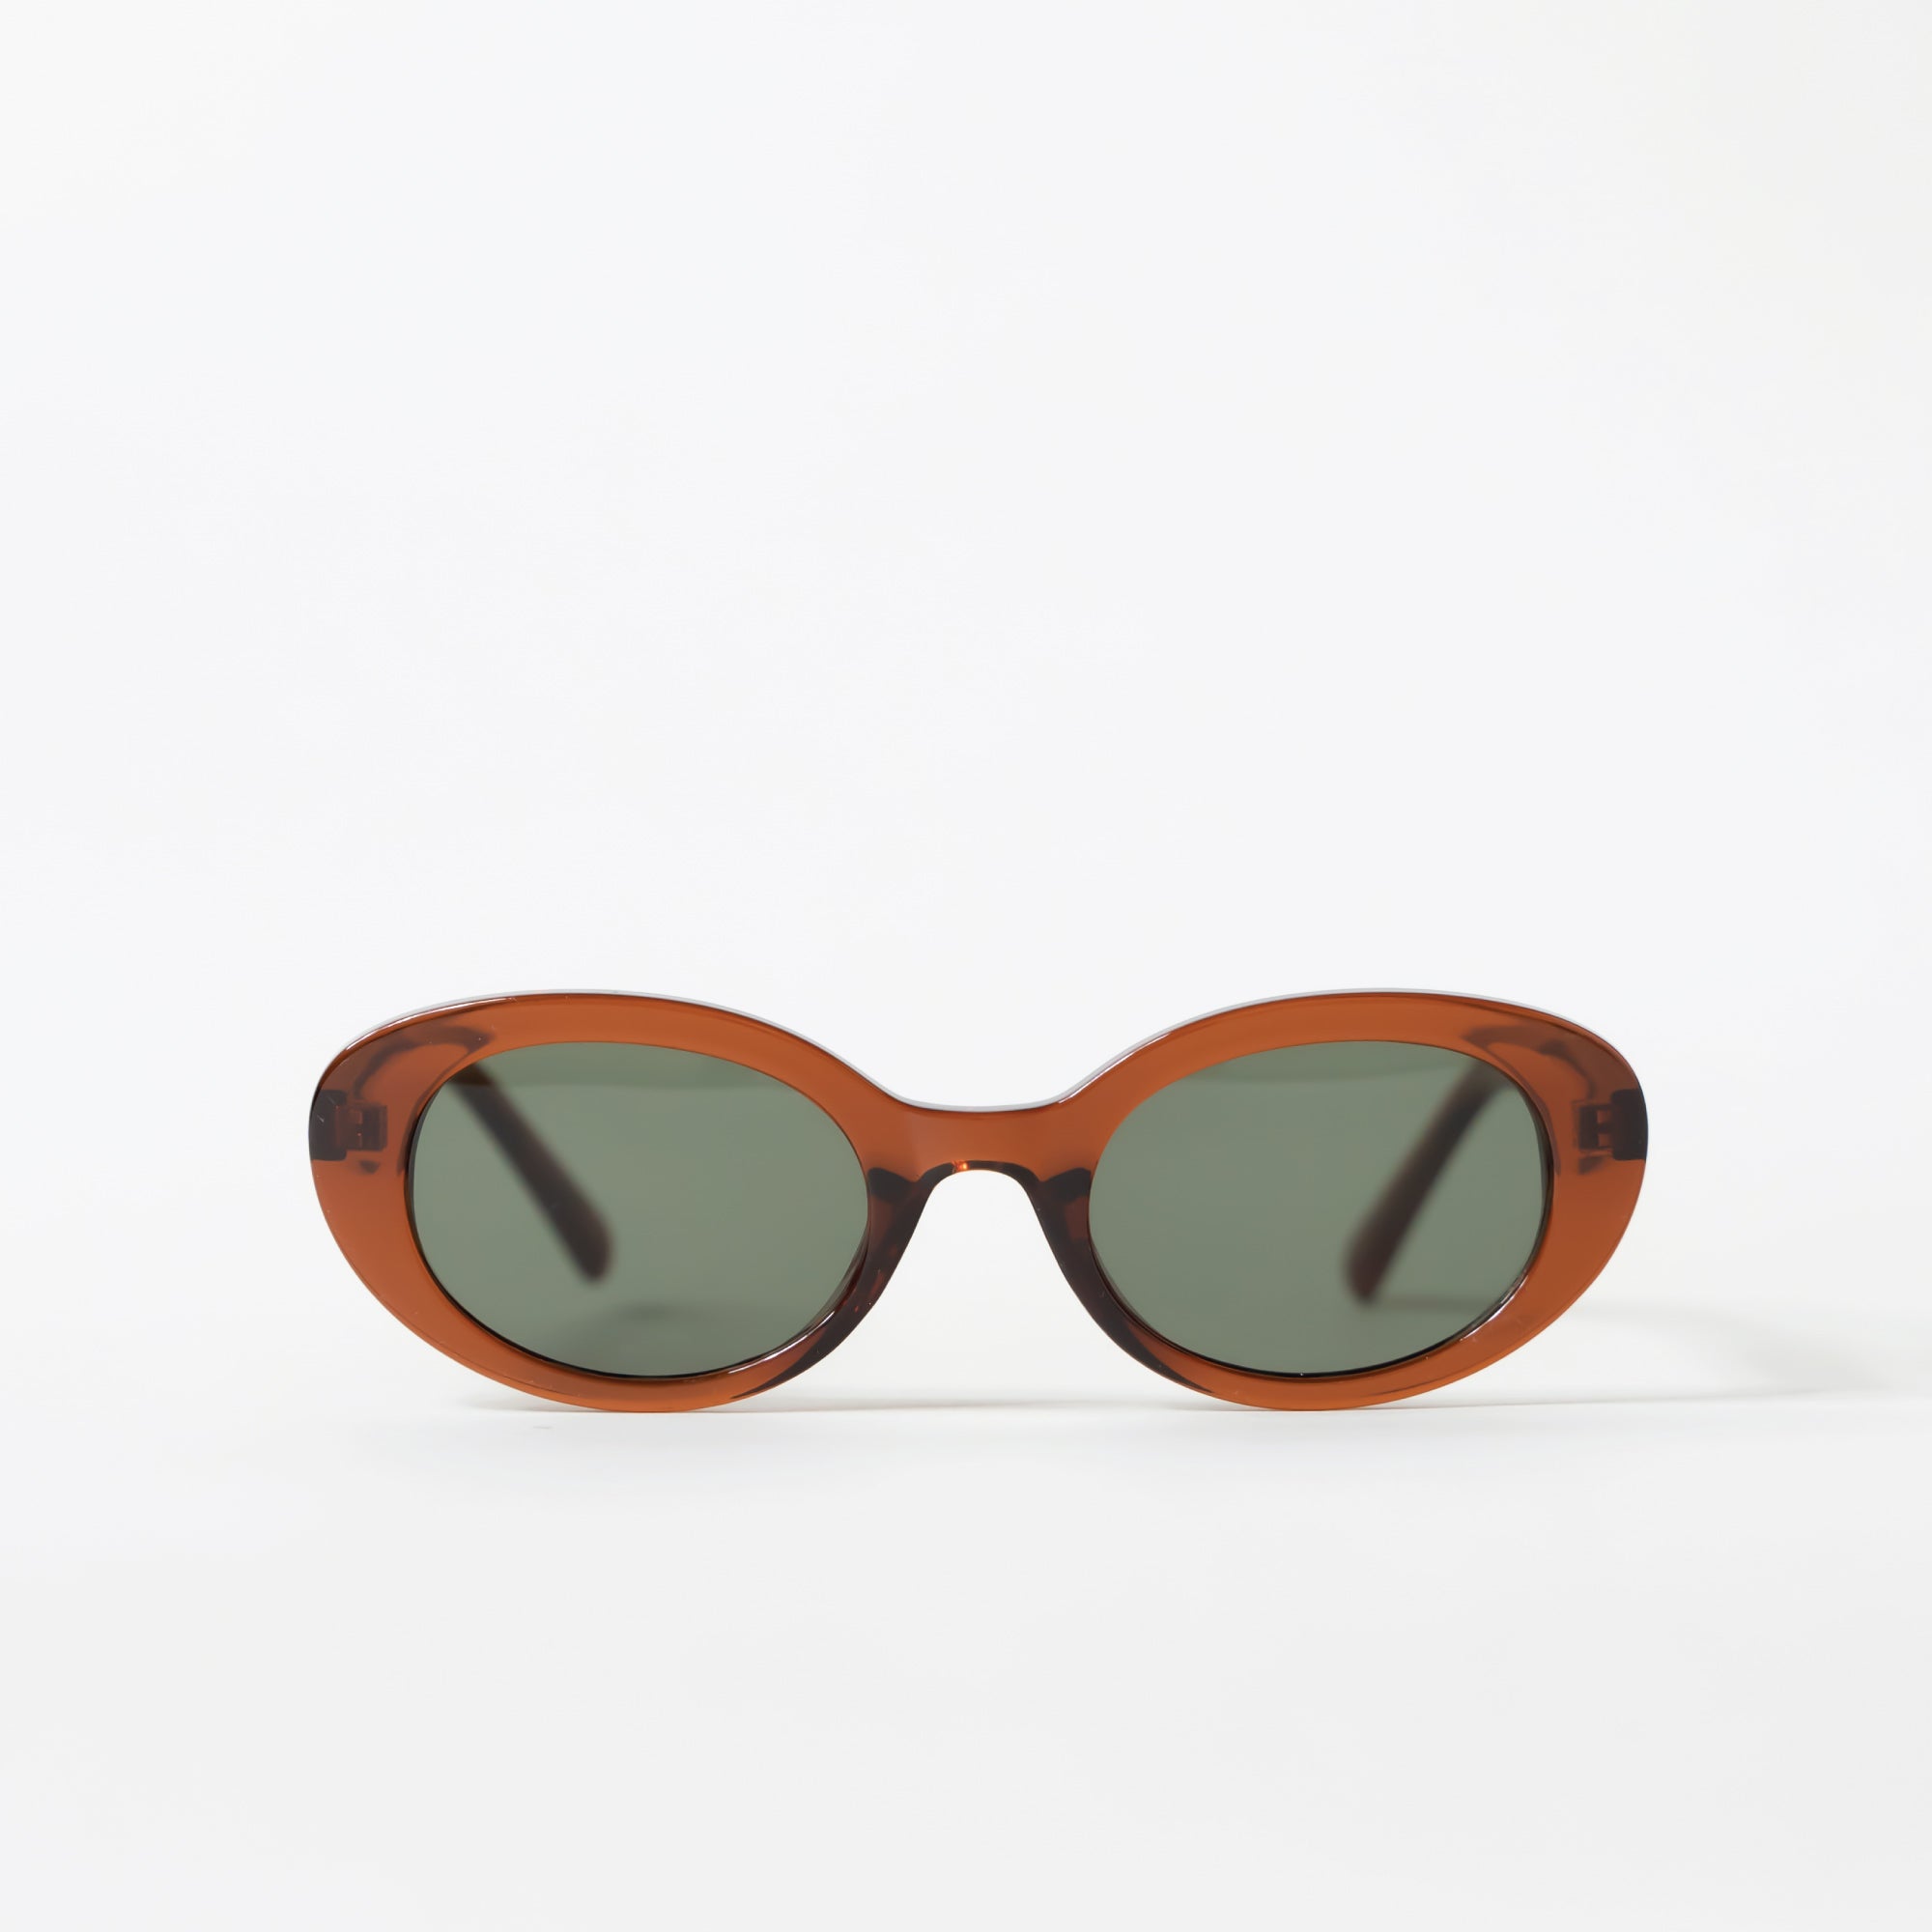 Green Tint Brown Clear Frame Round Eye Sunglasses